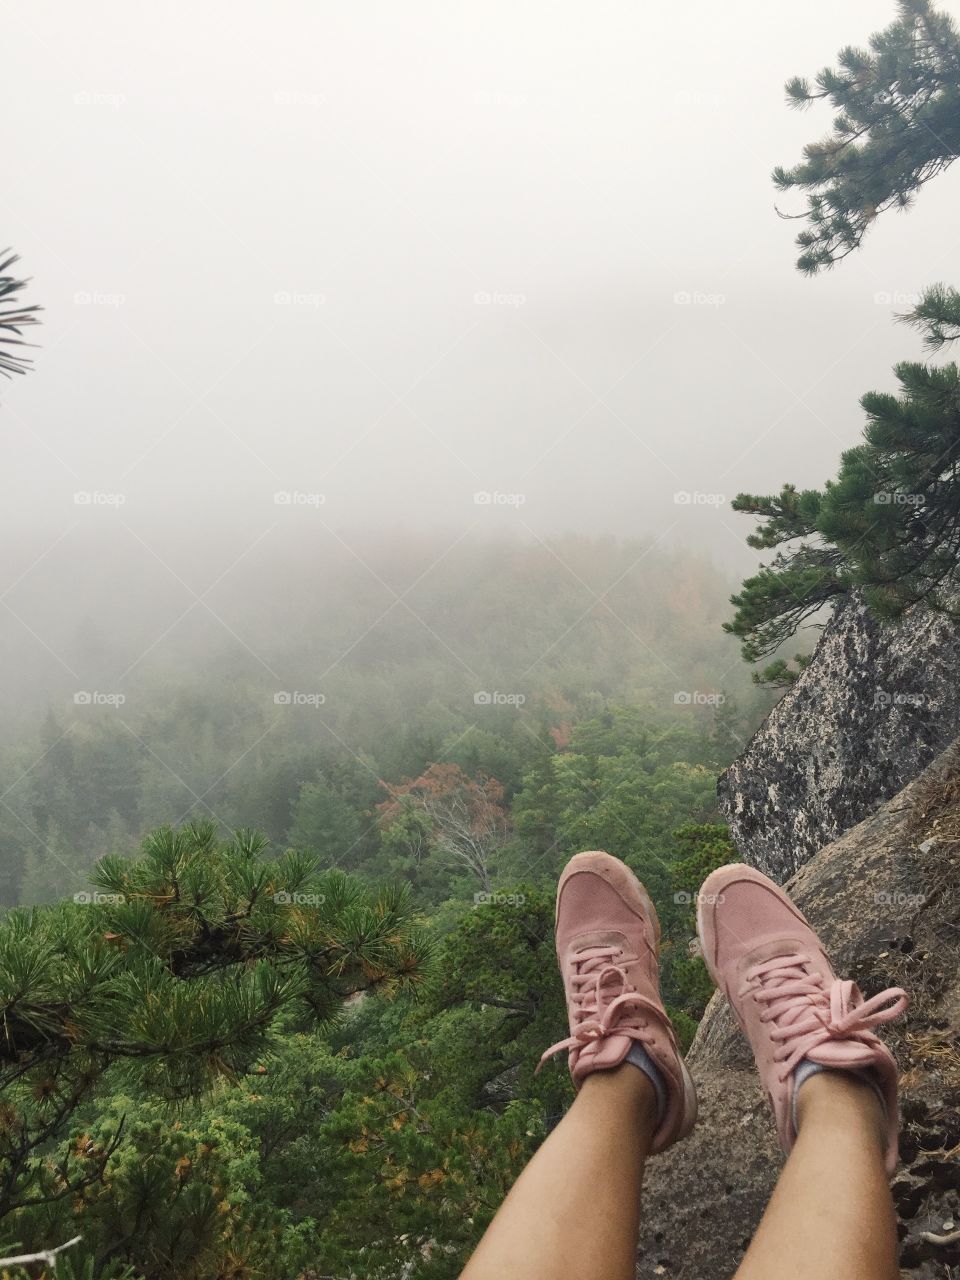 I was hiking on the fog day